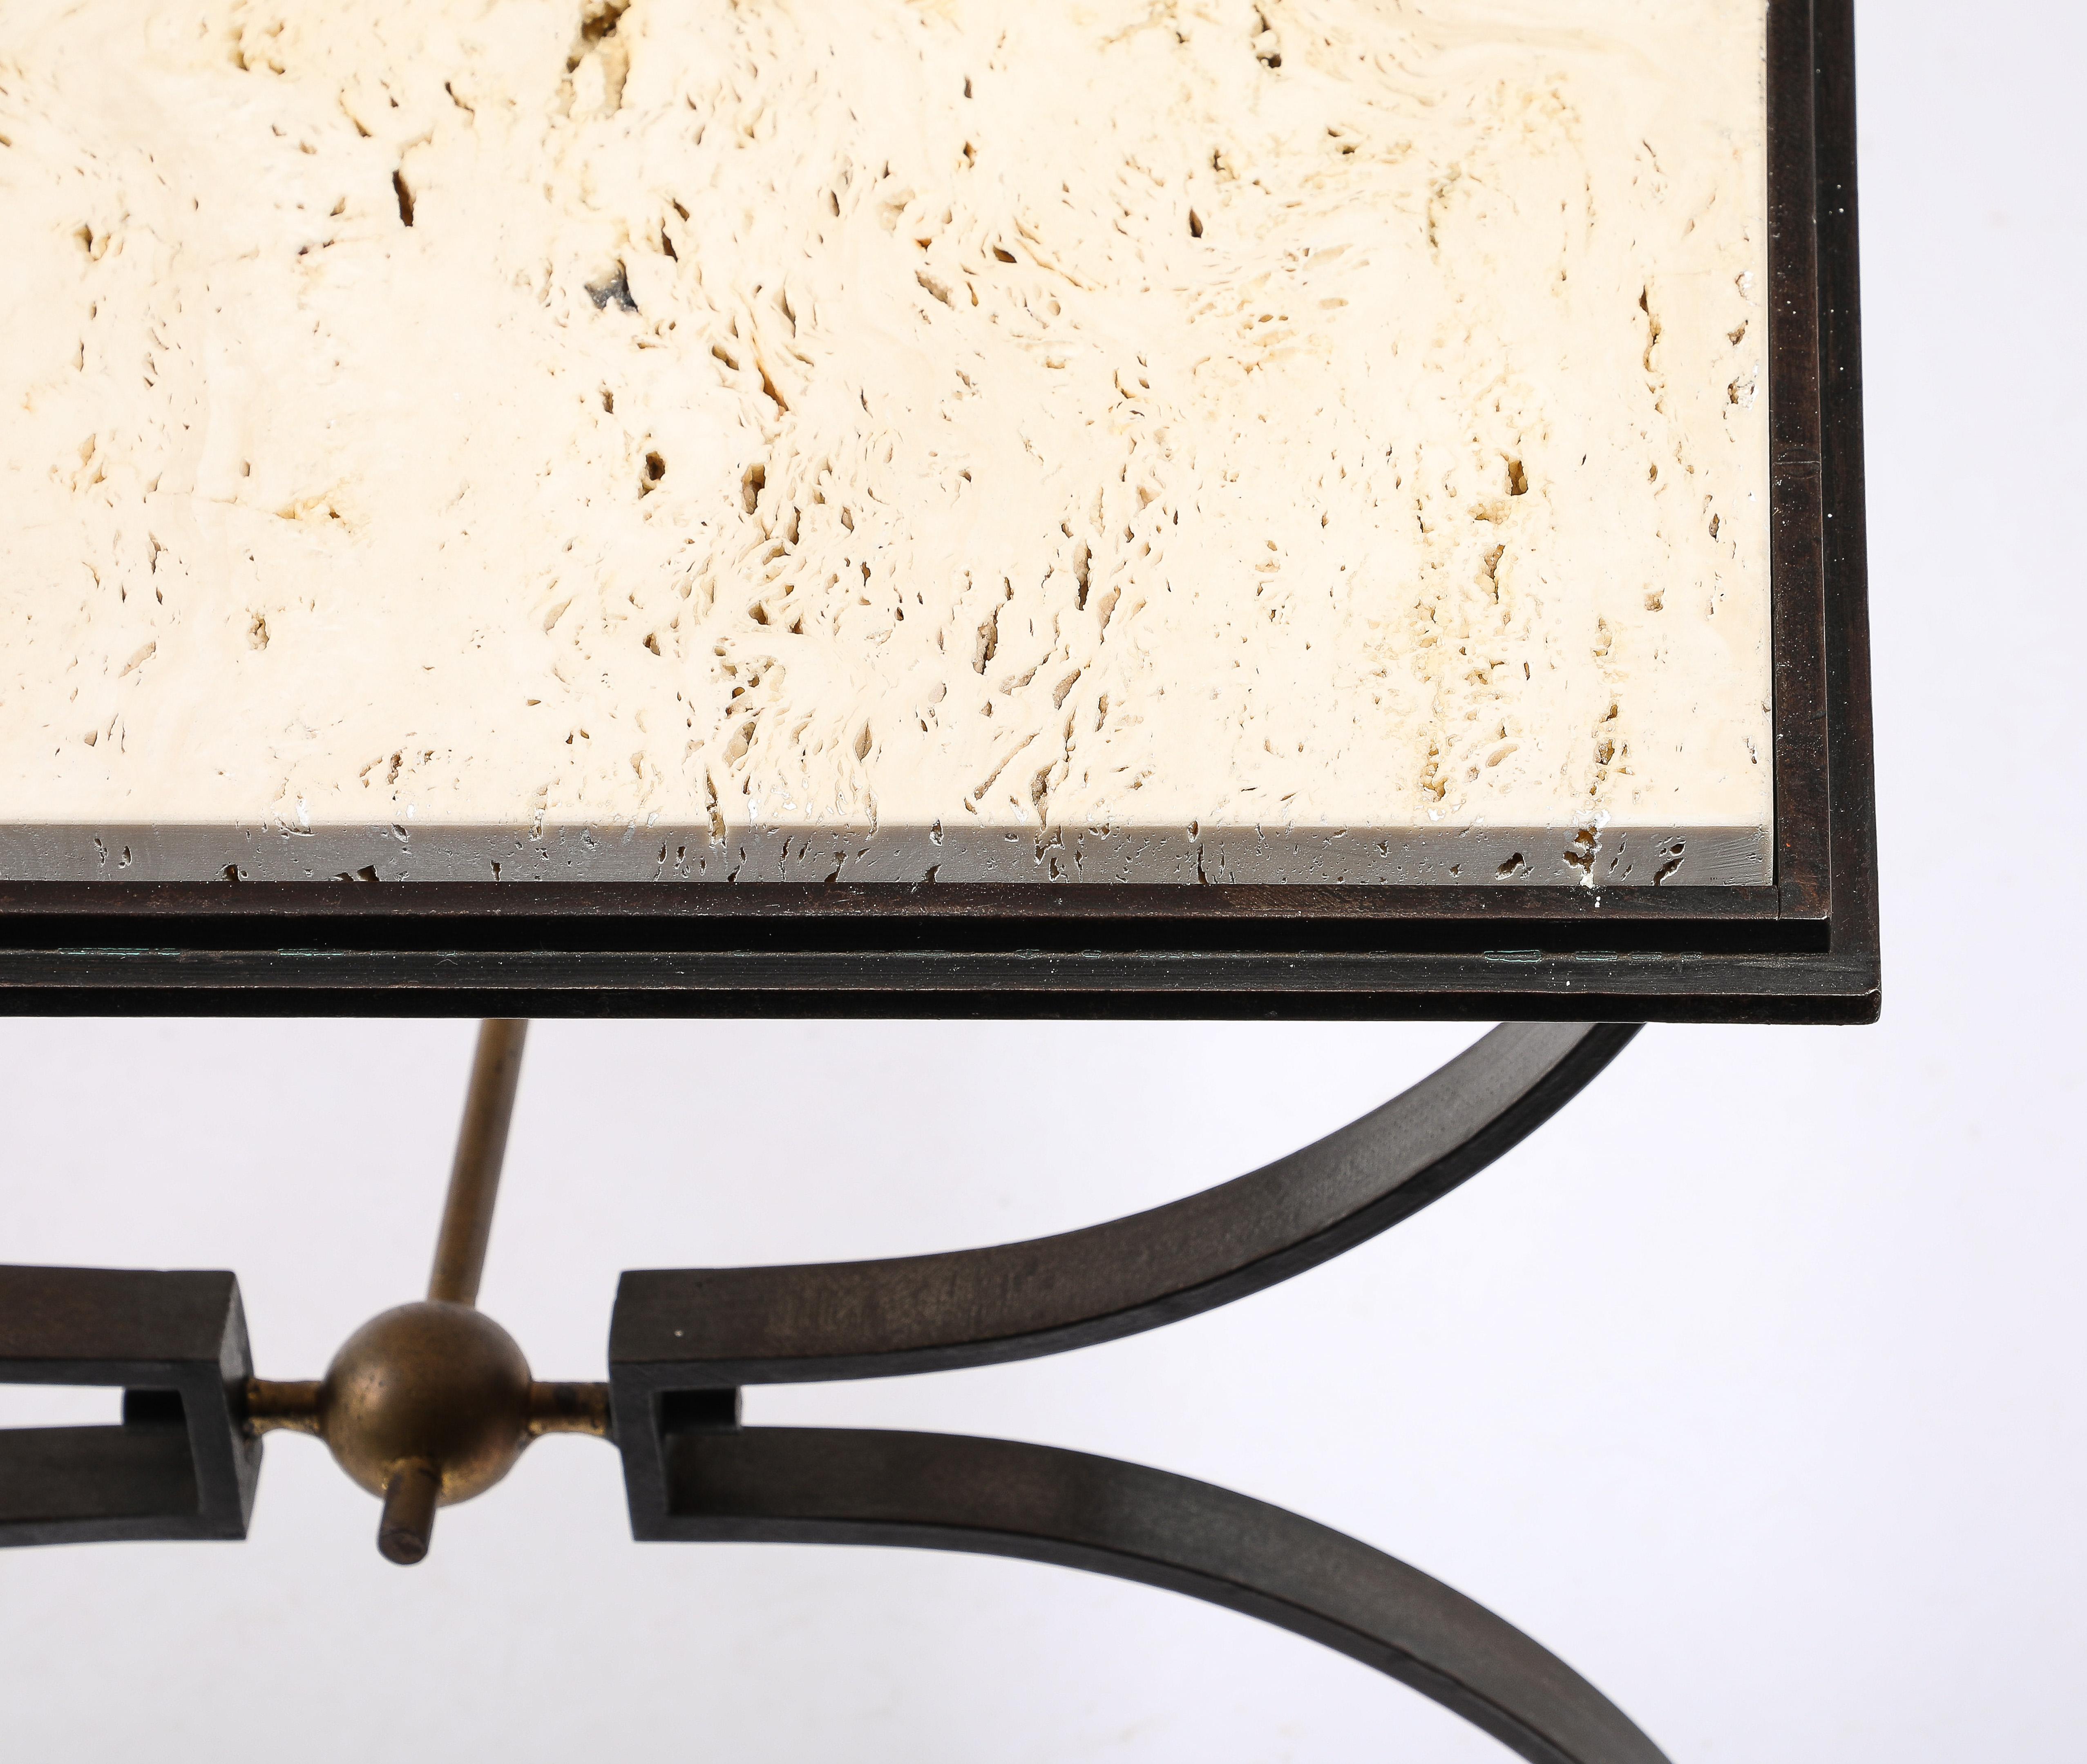 A Wrought Iron and Travertine table with a double layered top, the legs made of bent flat iron joined in the middle by a stretcher connected to a sphere.
Original patina and gilt finish.
